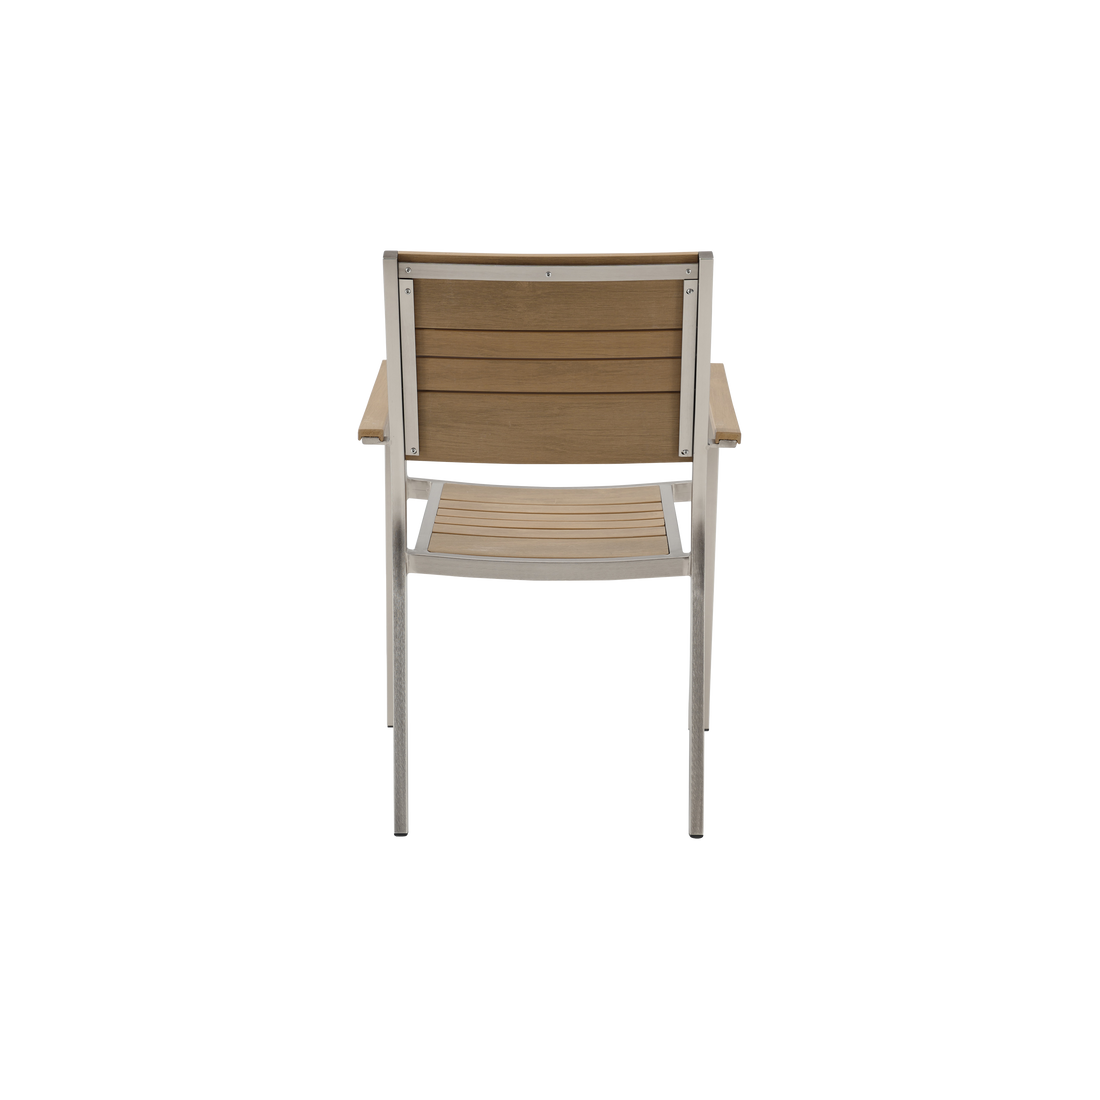 CHAIR WITH ARMRESTS MENORCA NATERIAL 57X55 ALUMINUM POLIWOOD - best price from Maltashopper.com BR500013604